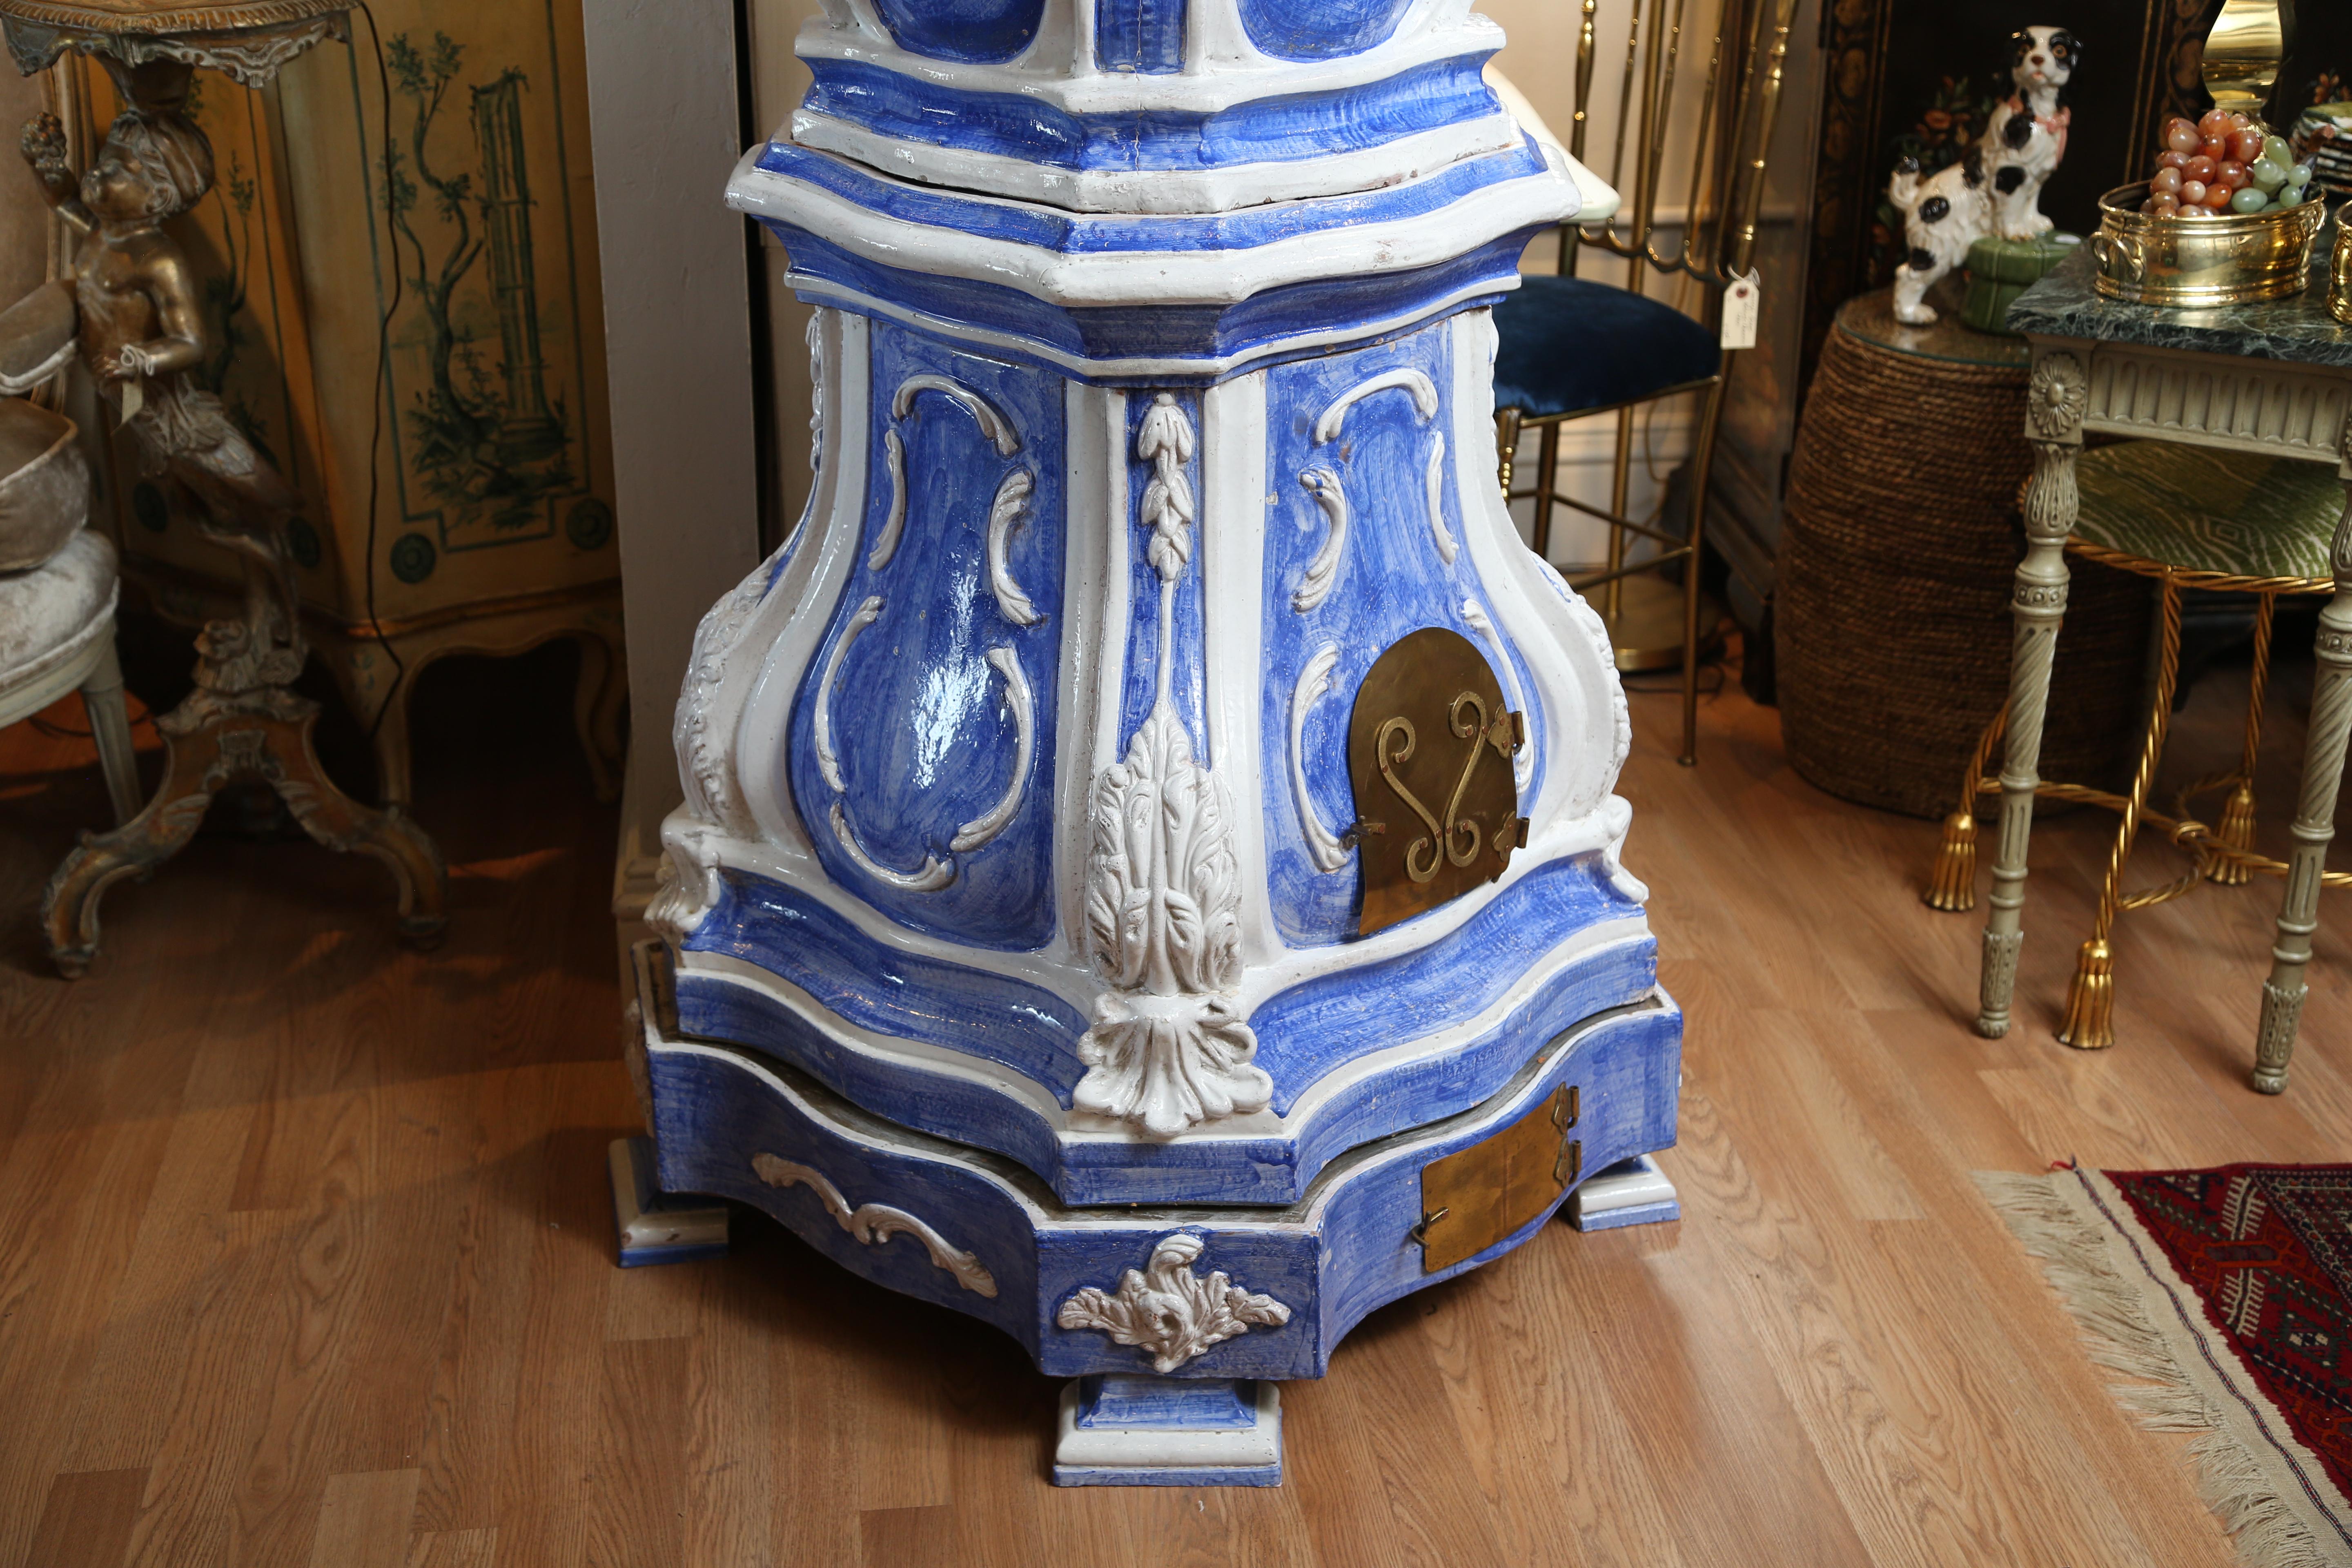 19th century French blue and white glazed terracotta stove.